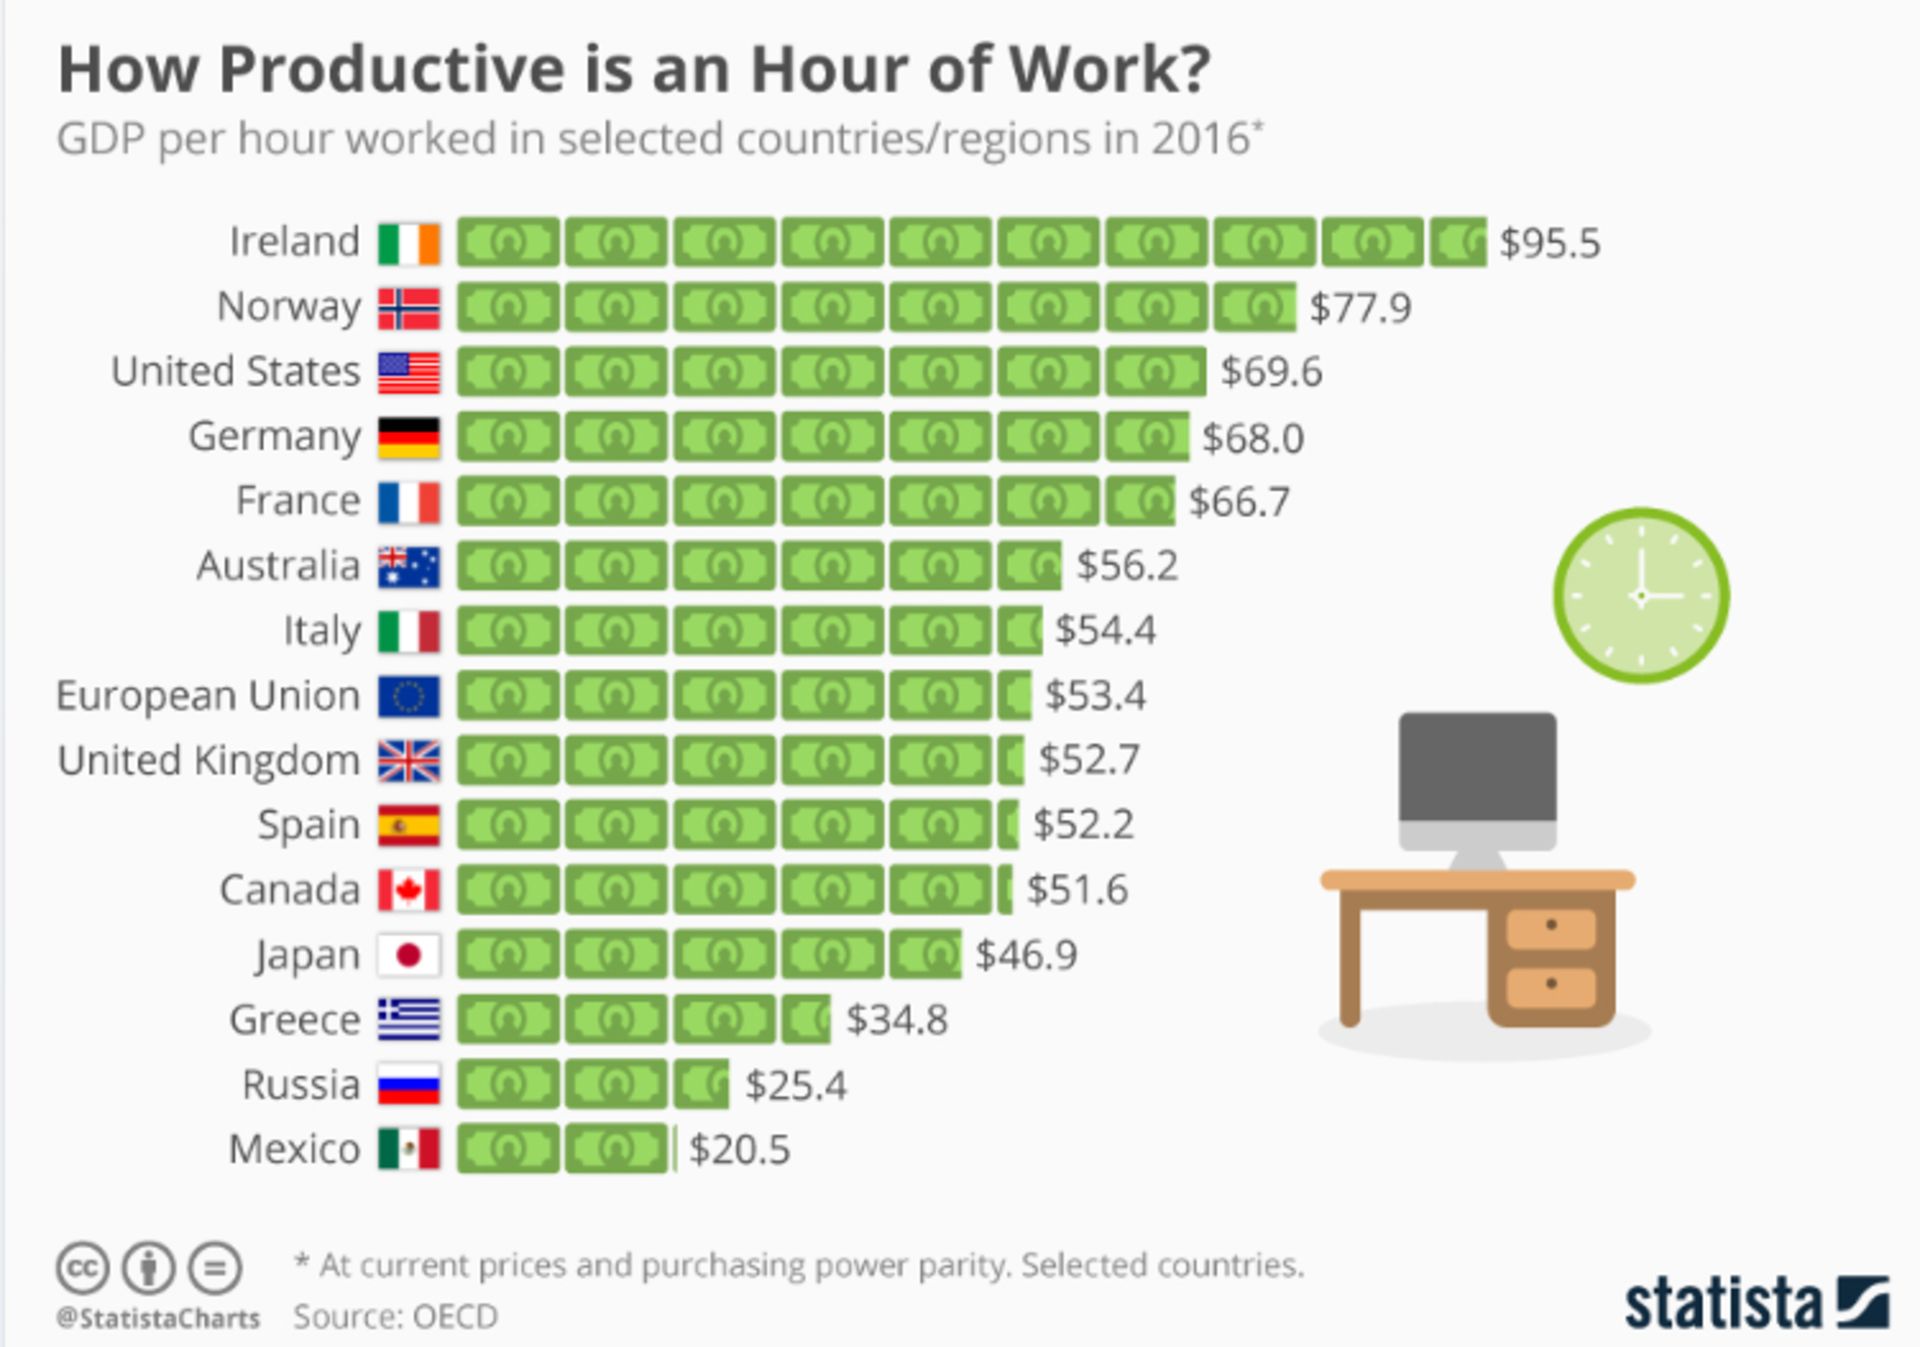 working hours